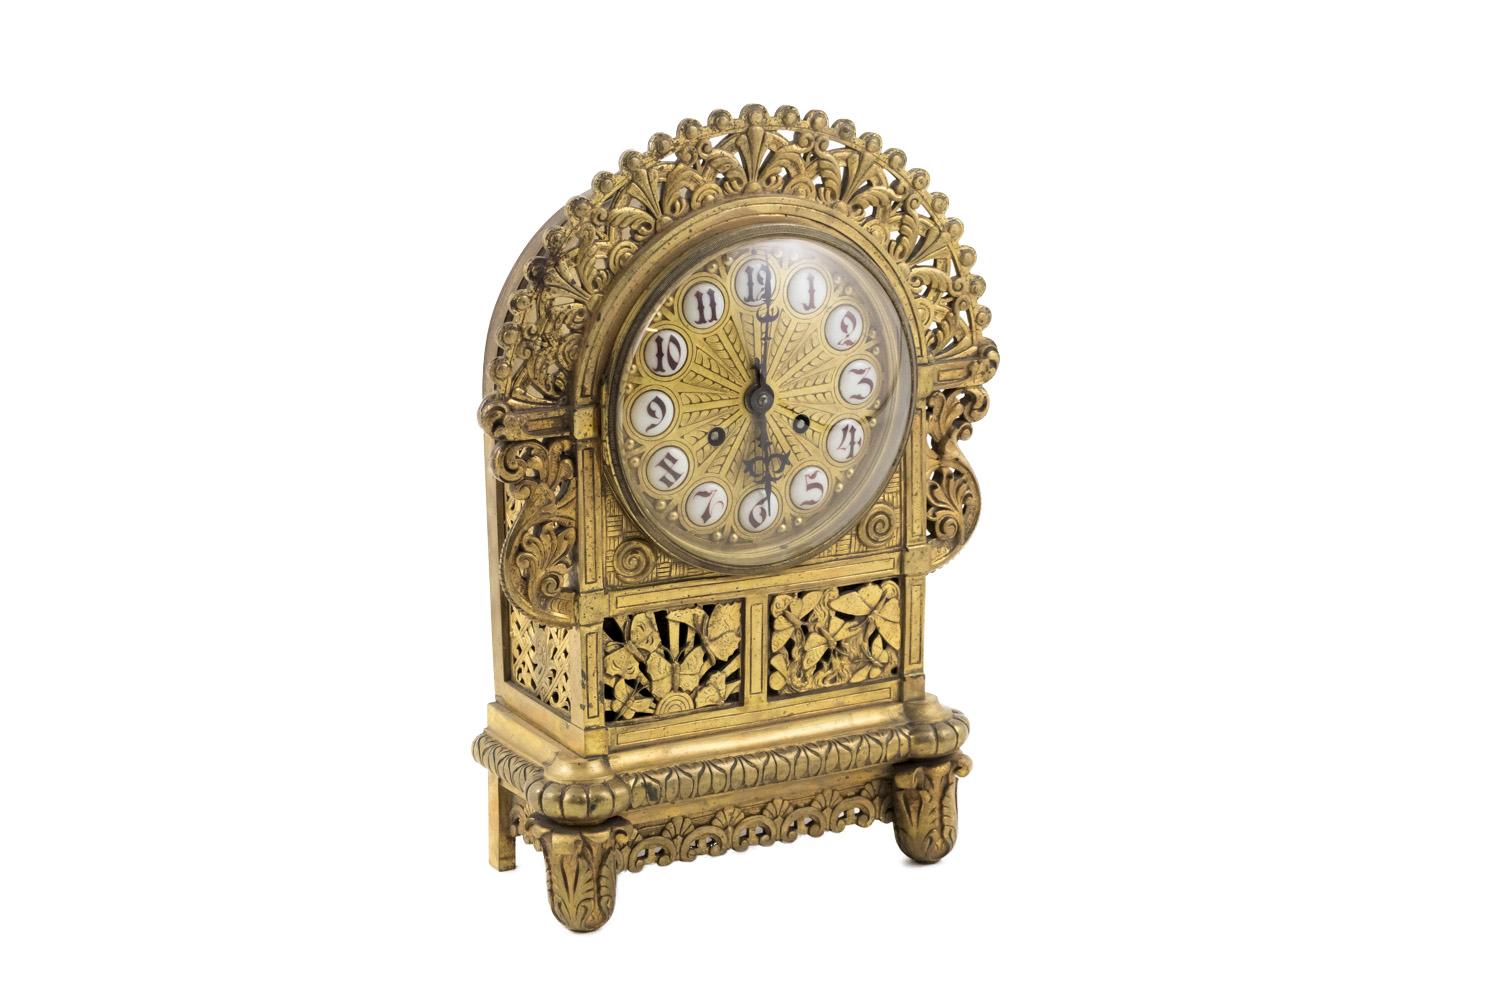 Gilt bronze clock with a case with floral and foliage motifs. Base with two front oval foot with wounded leaves motifs and two straight back foot with a rectangular shape linked each other, on three sides, by a C scrolls frieze and stylized palm